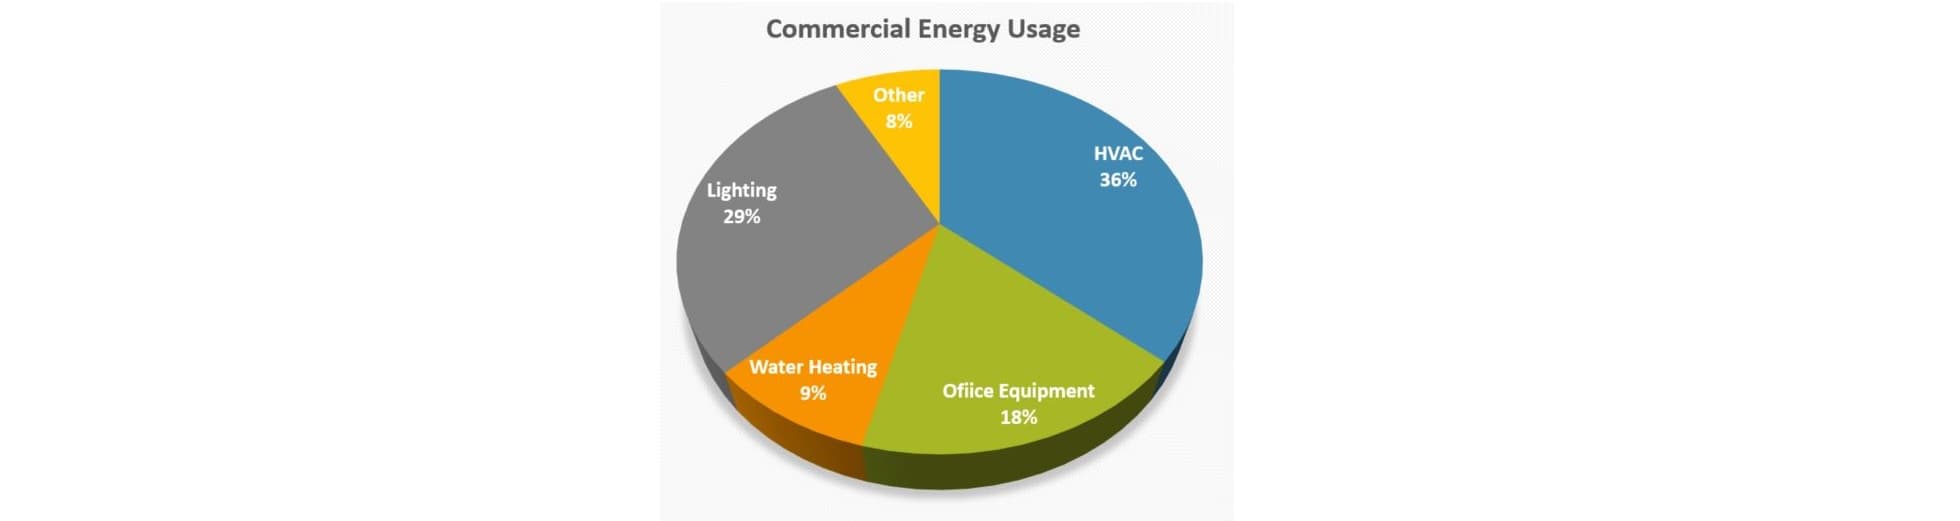 Commercial Energy Usage 